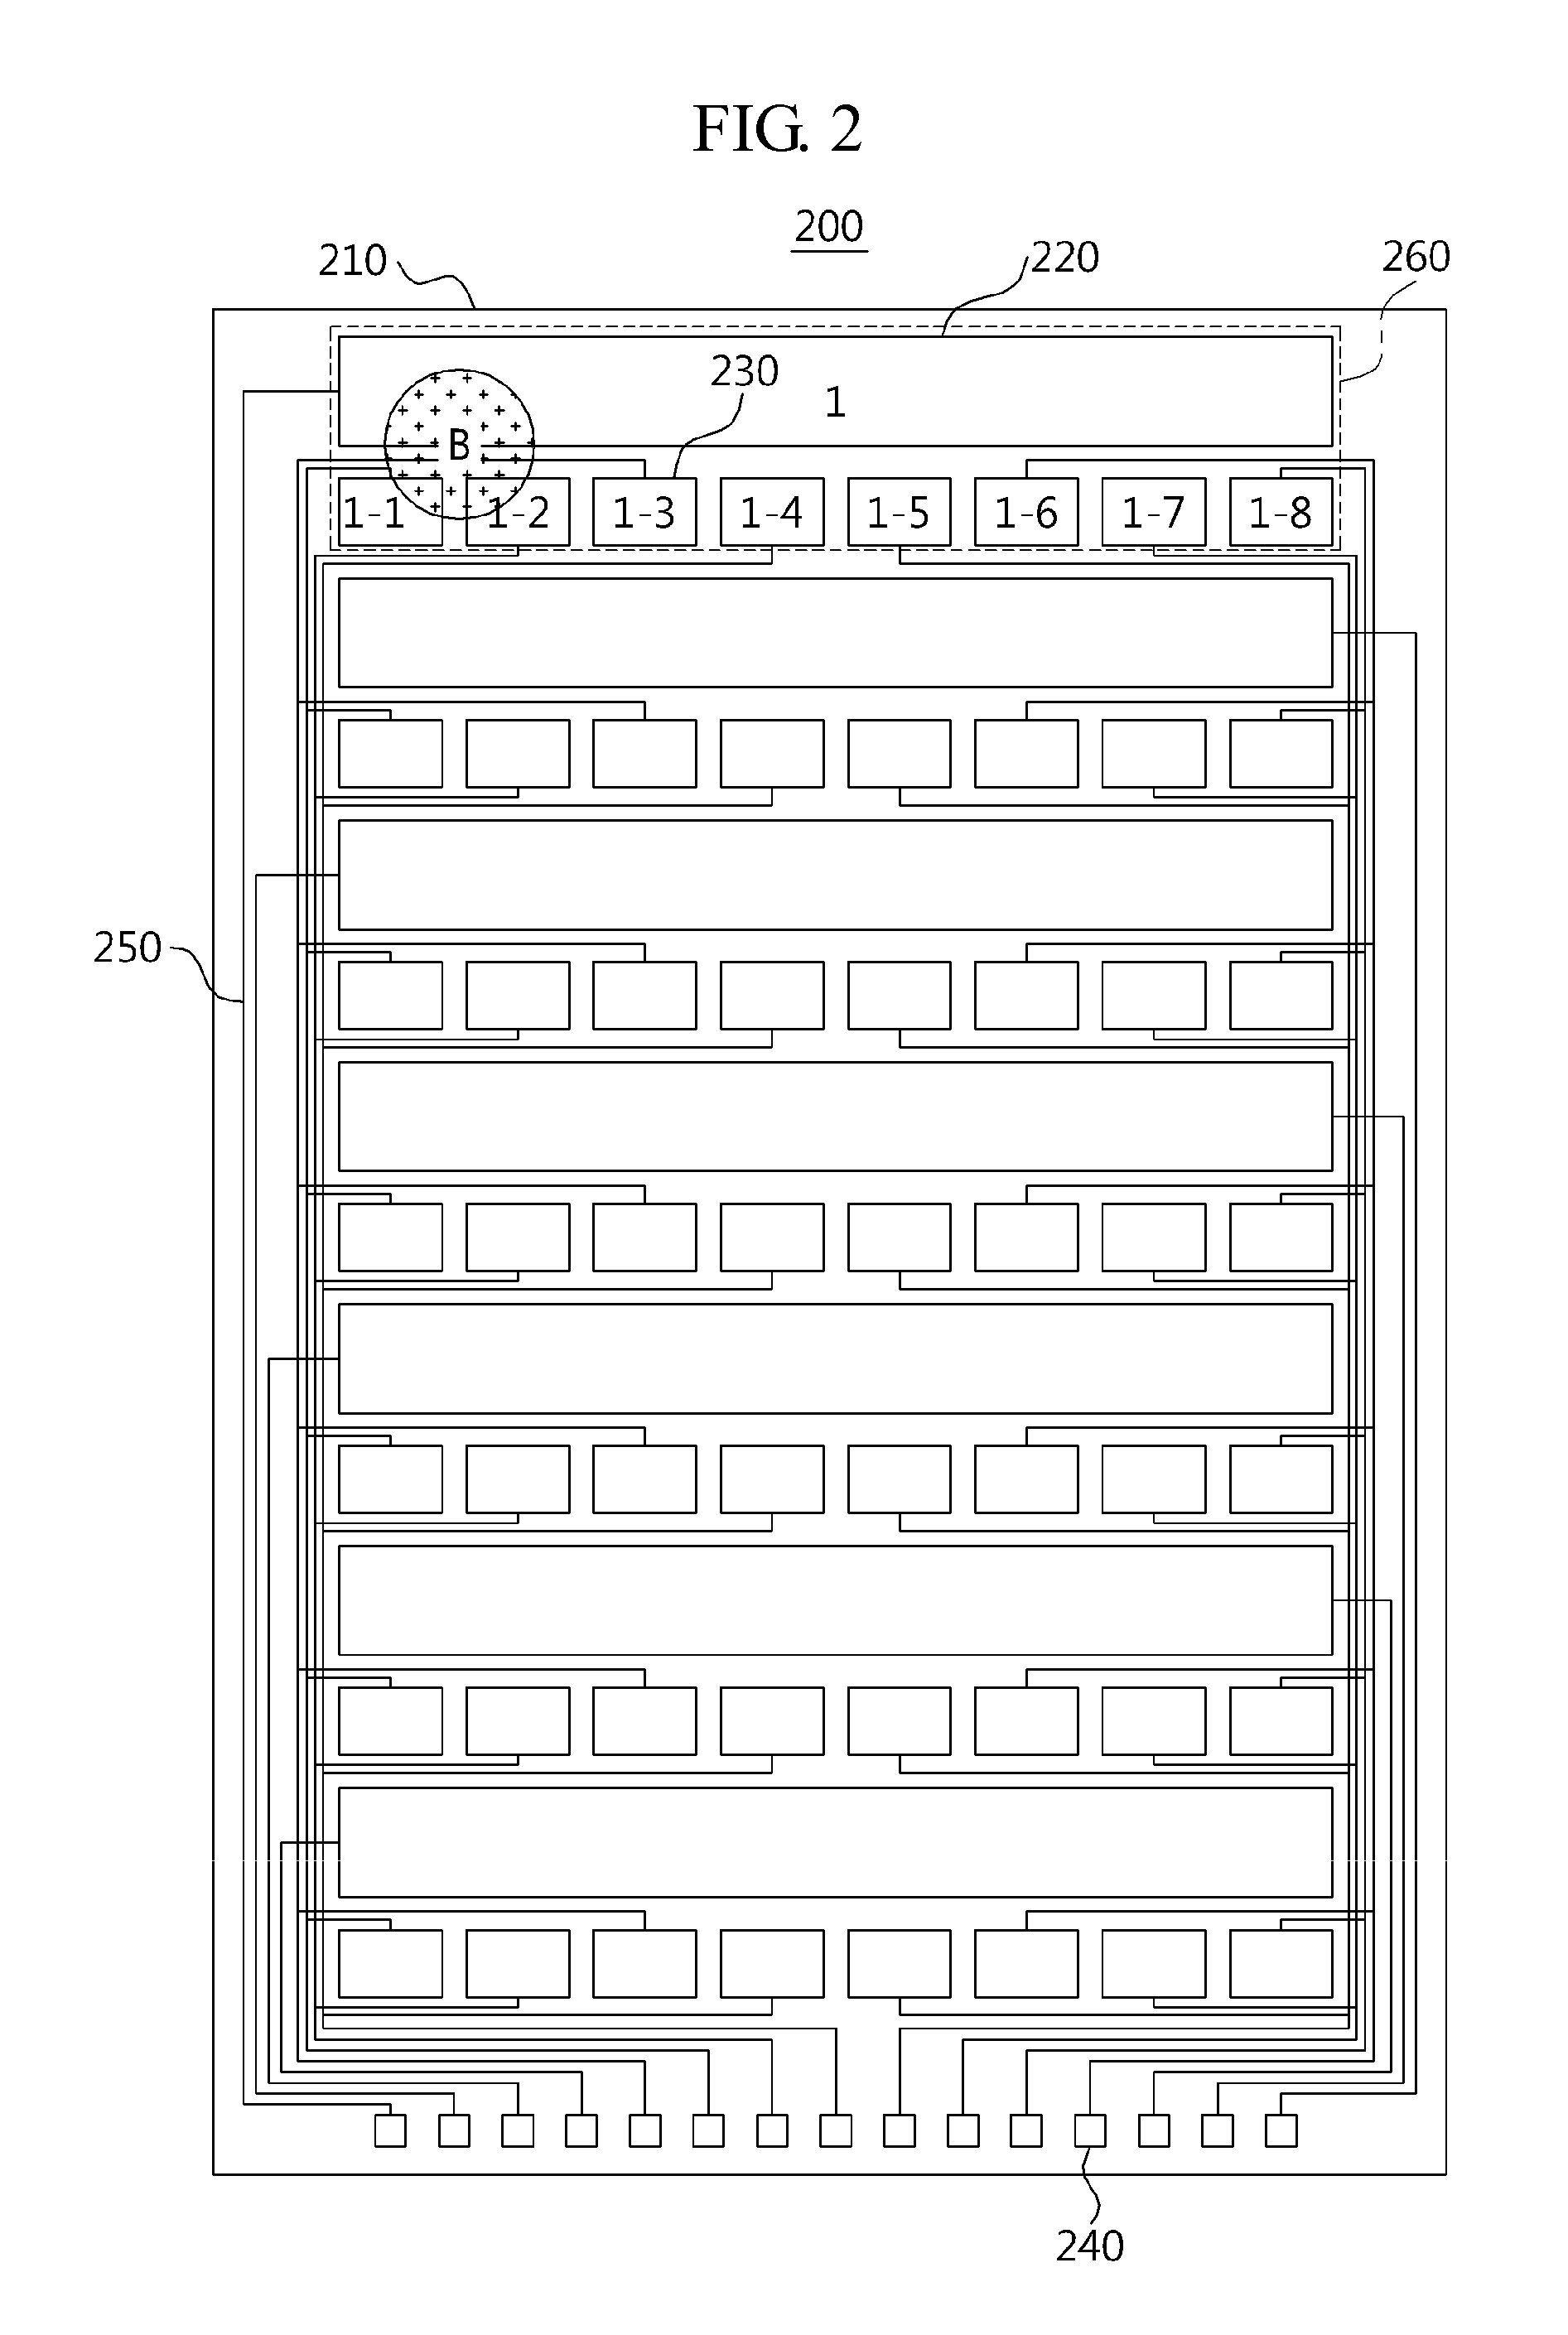 Apparatus and Method for Detecting Contact